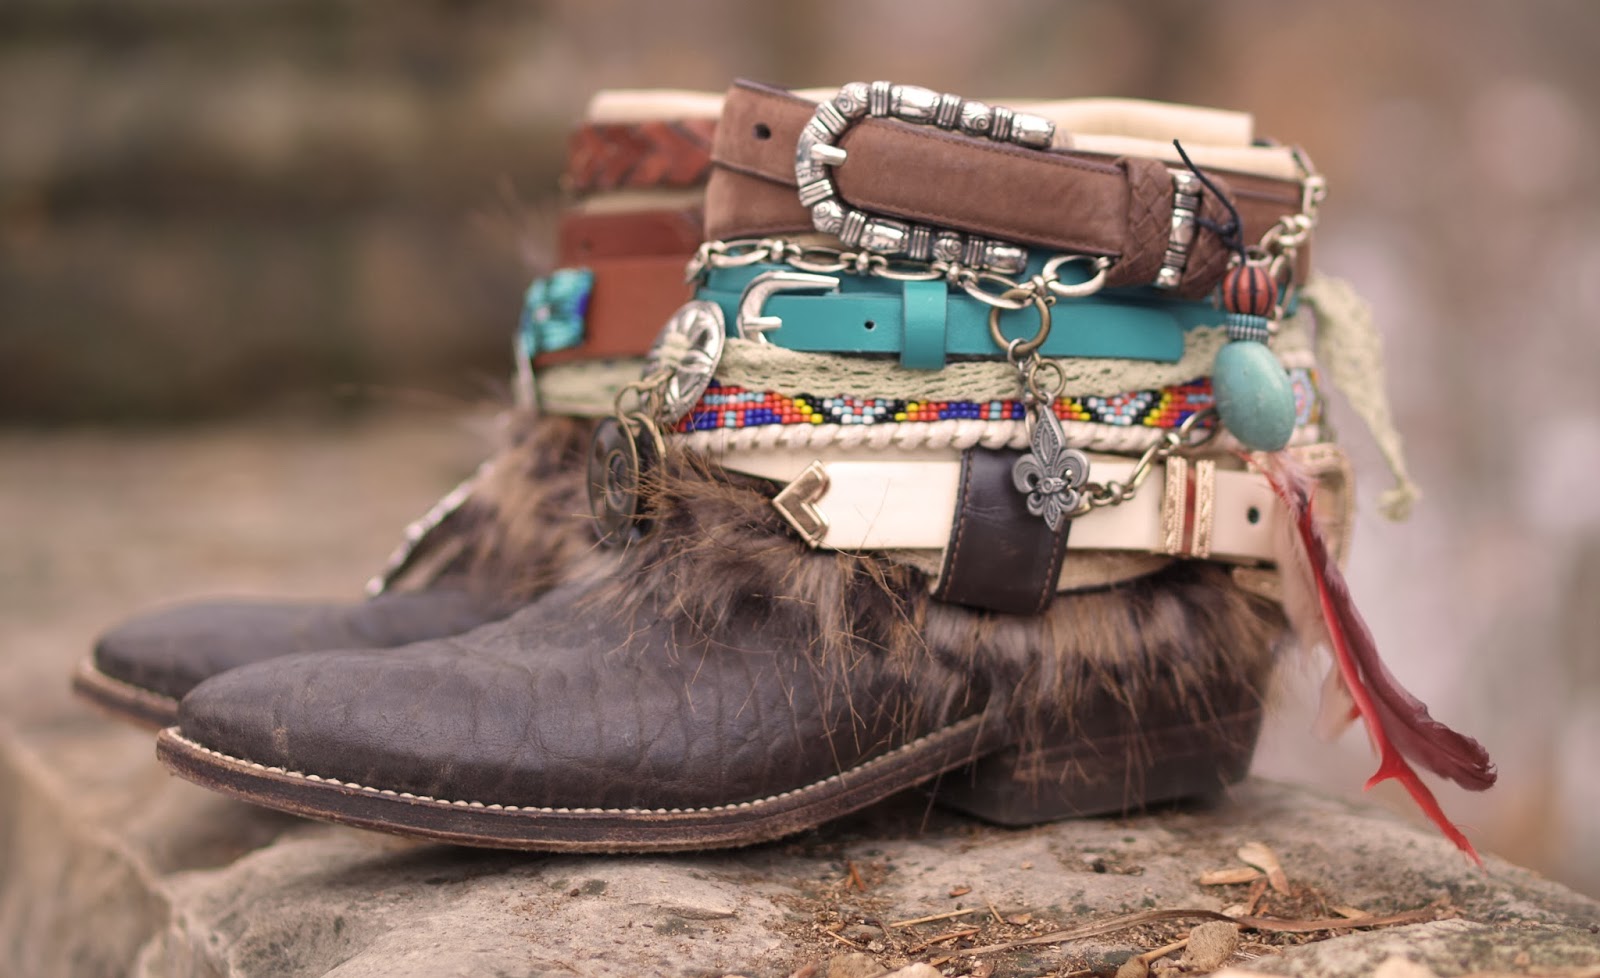 TheLookFactory: My reworked vintage boho boots